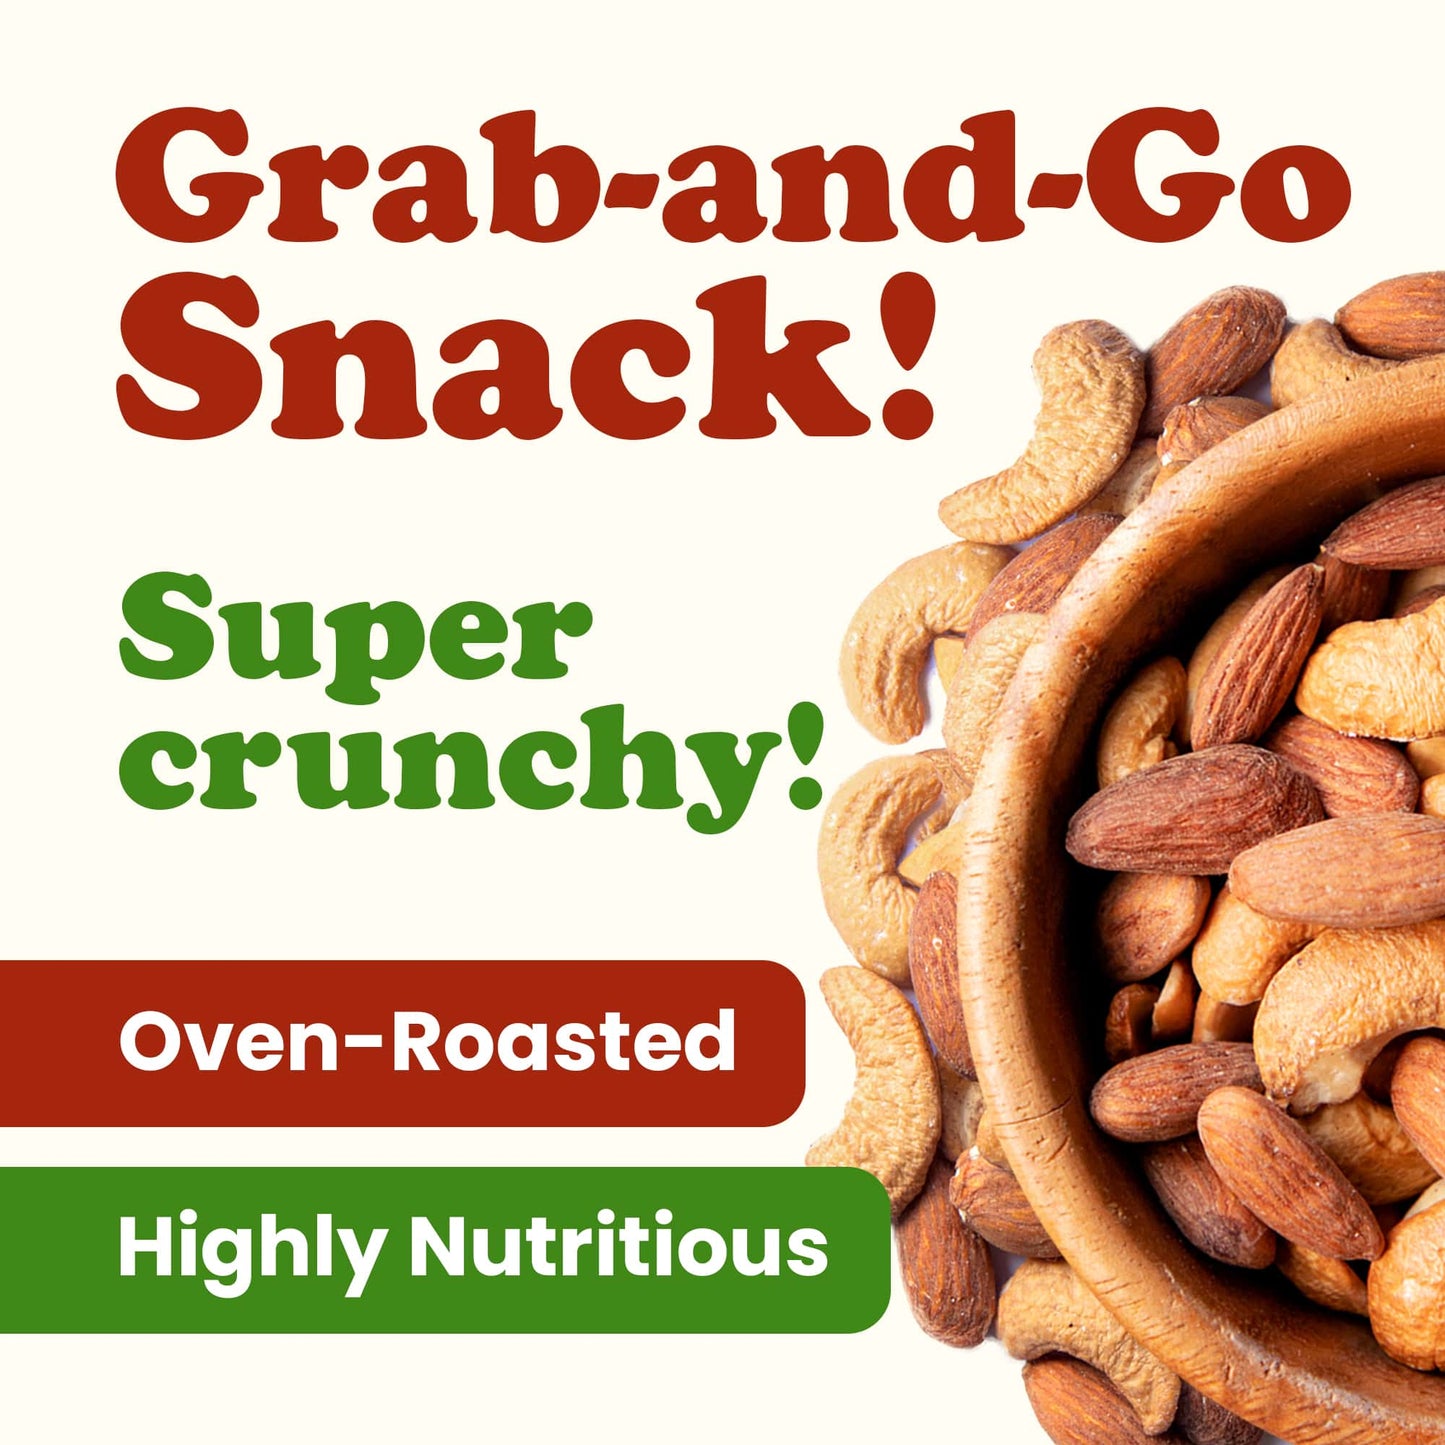 Organic Dry Roasted Almonds and Cashews Mix – Unsalted Oven Roasted Nuts, Non-GMO, Protein Rich Trail Mix, Healthy Vegan Snack, No Oil Added, Kosher Blend, Bulk